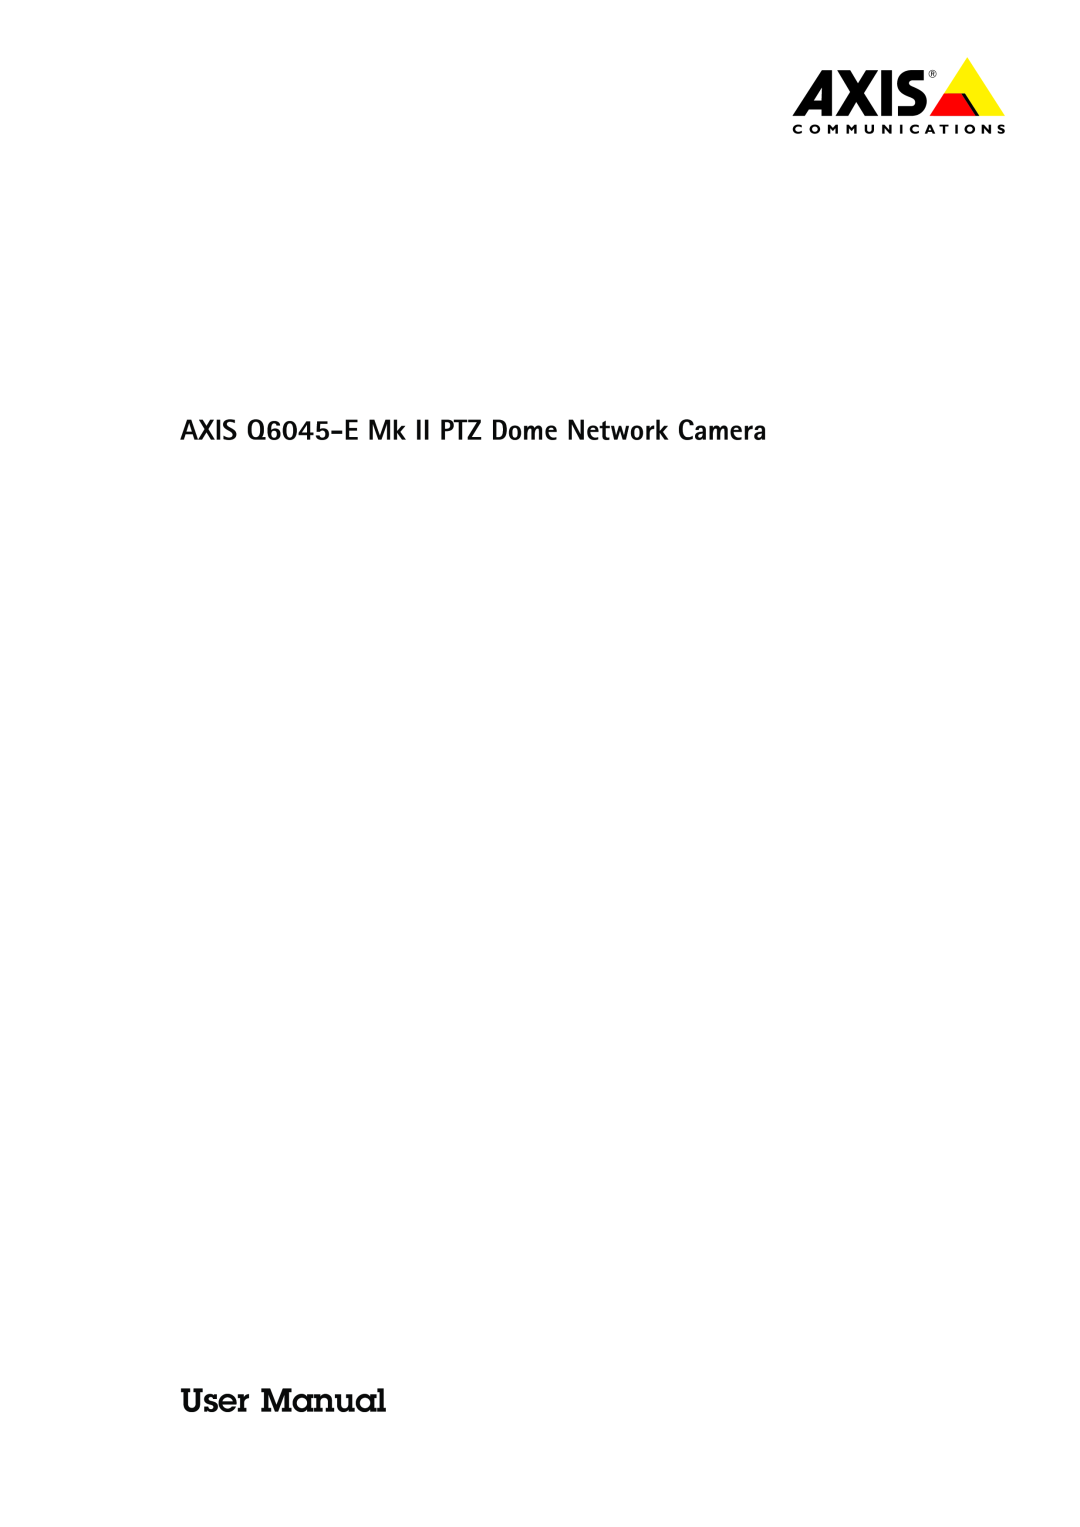 Axis Communications user manual AXIS Q6045-EMk II PTZ Dome Network Camera 